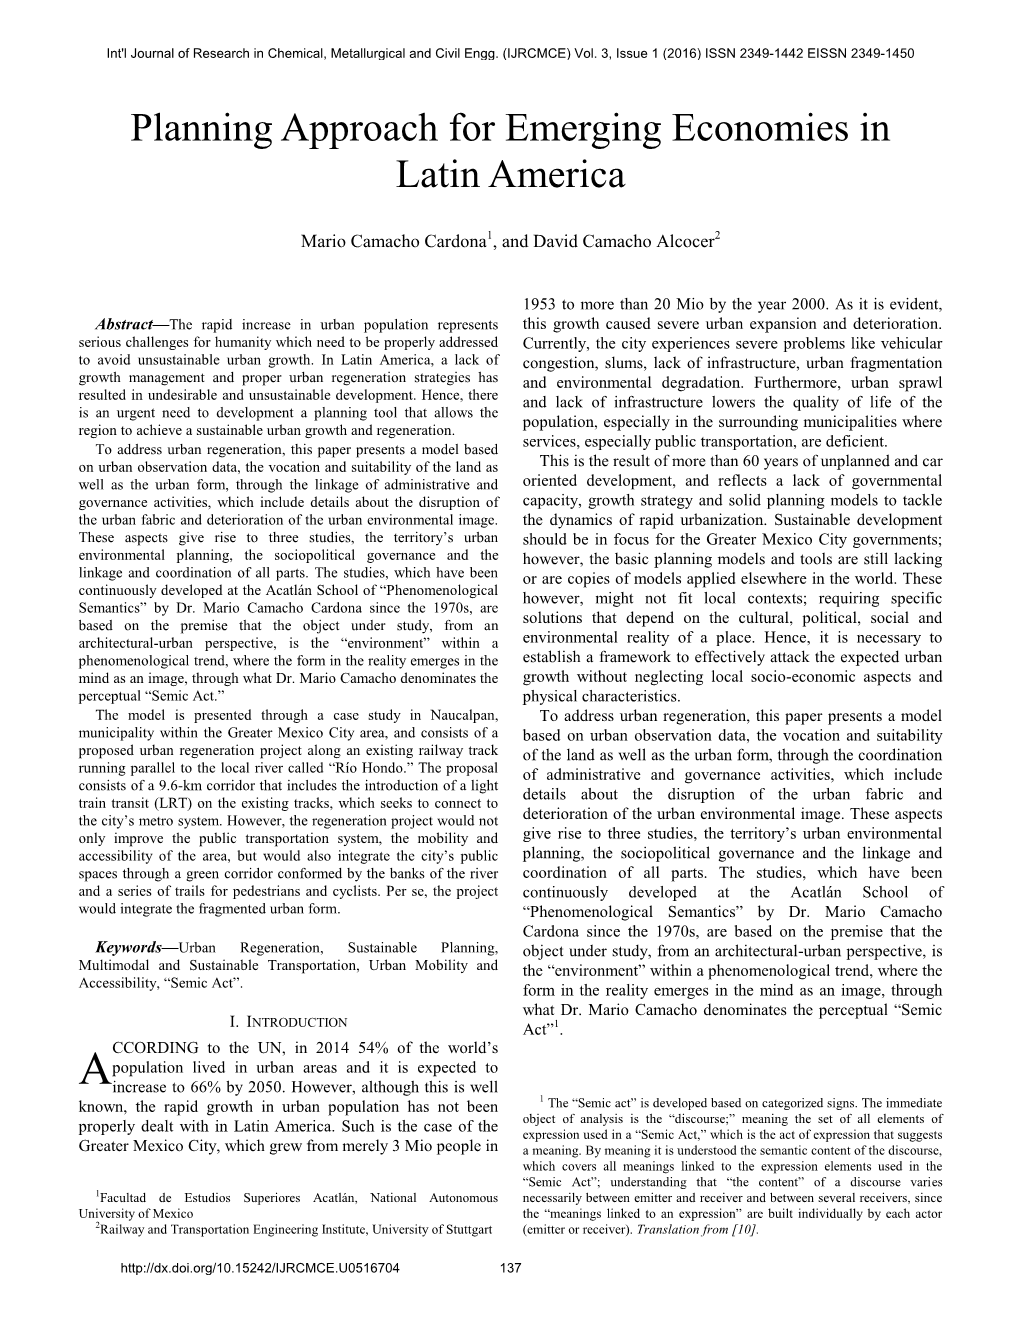 Planning Approach for Emerging Economies in Latin America